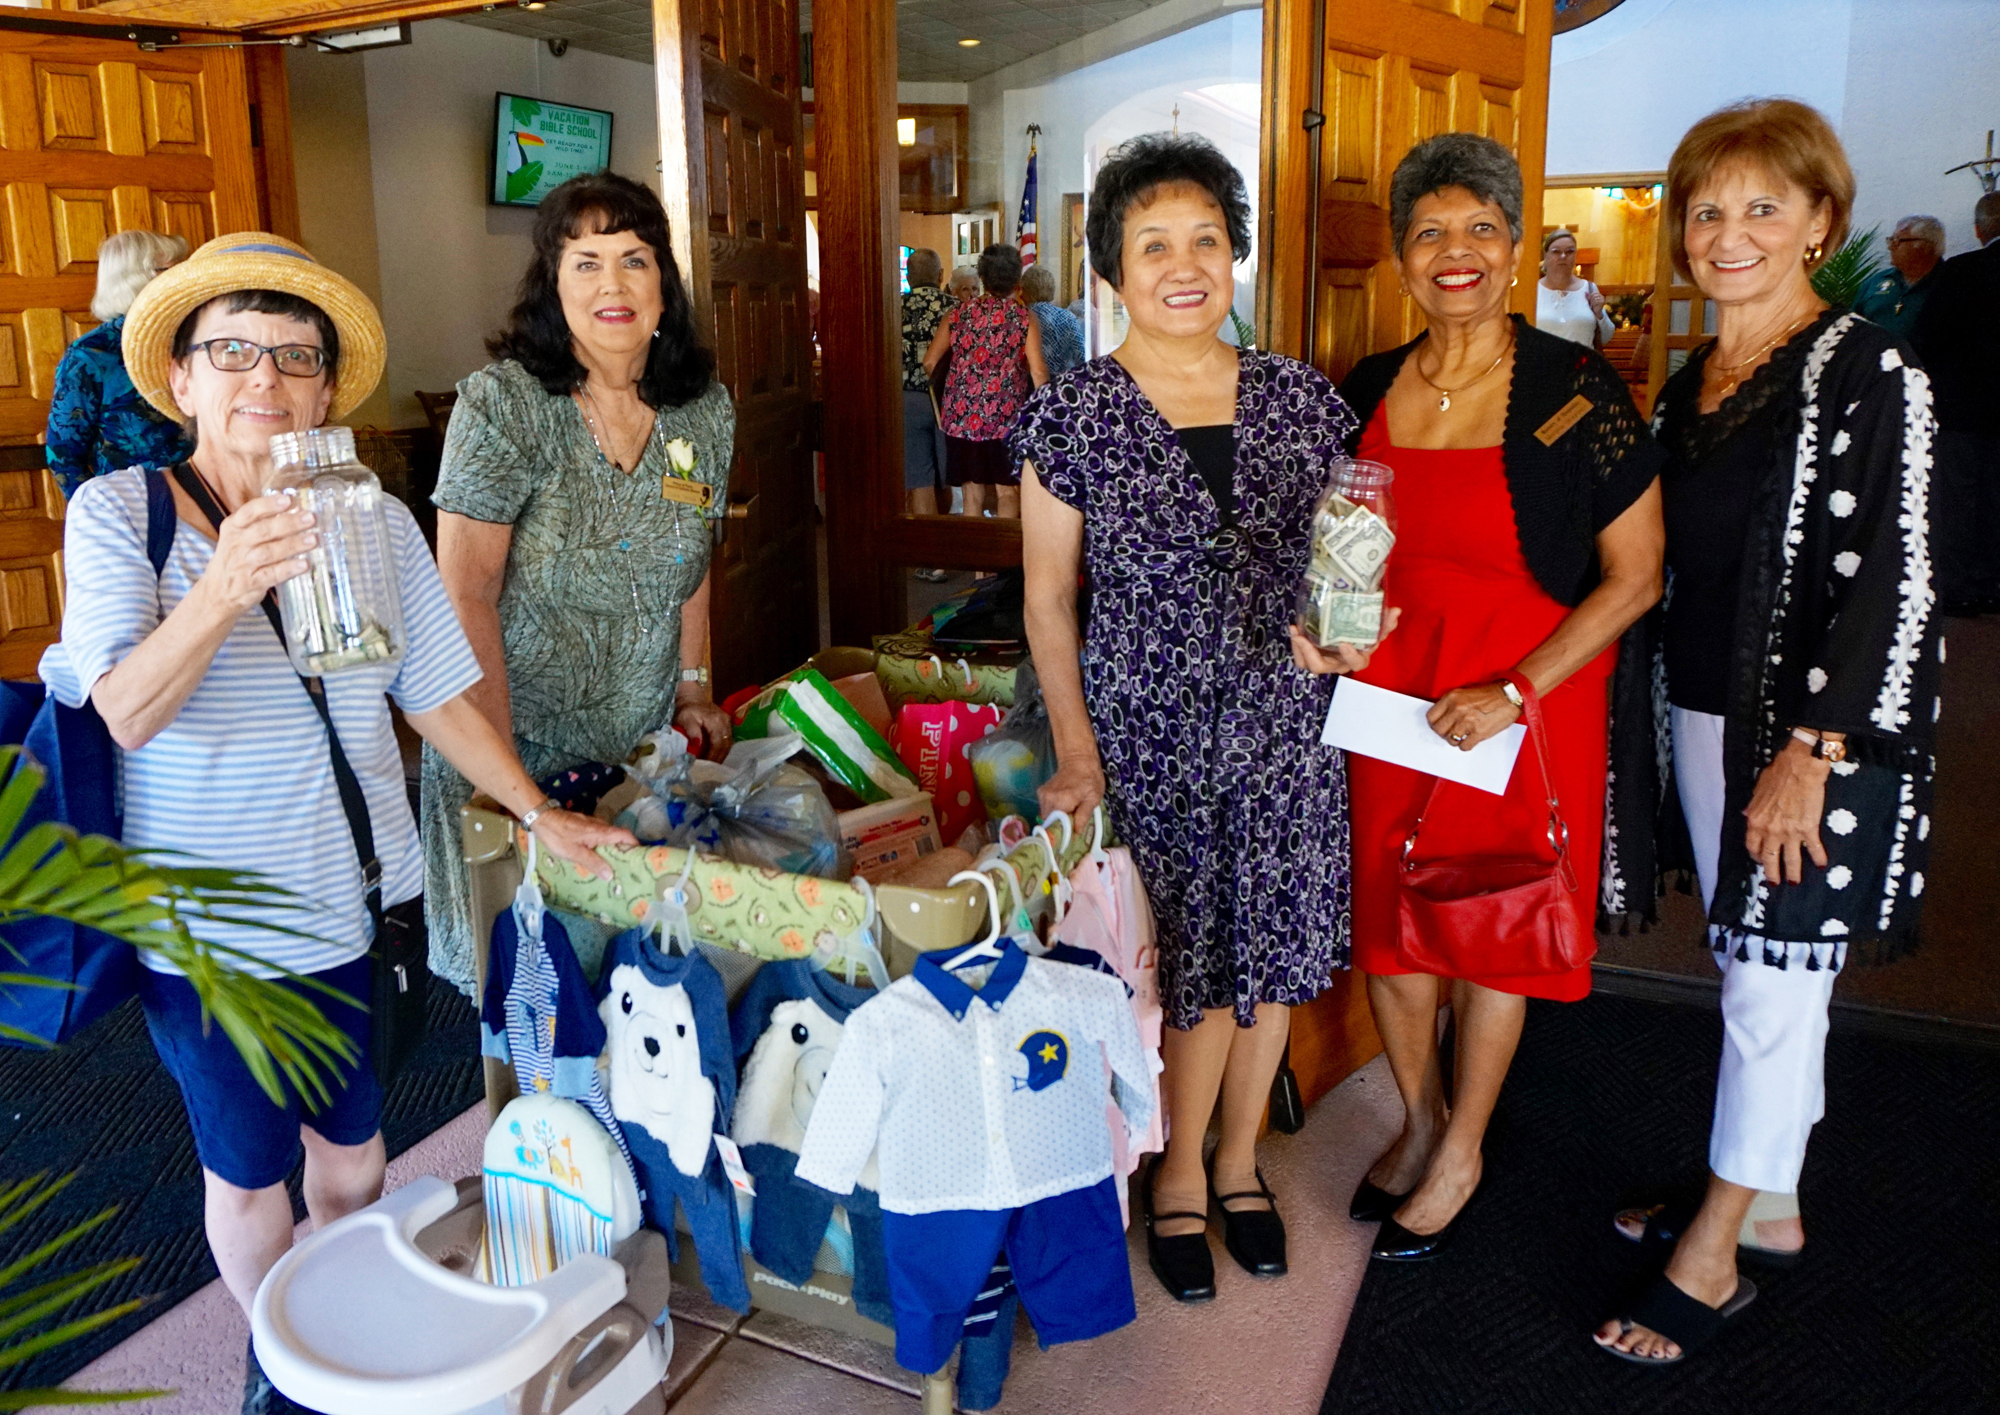 Marcia Rudman, Elena Torres, Theresa Ho, Marlene Braganza and Yvonne Turnbull are collecting items after mass for the Prince of Peace Council of Catholic Women’s Mother’s Day Baby Shower. Courtesy photo